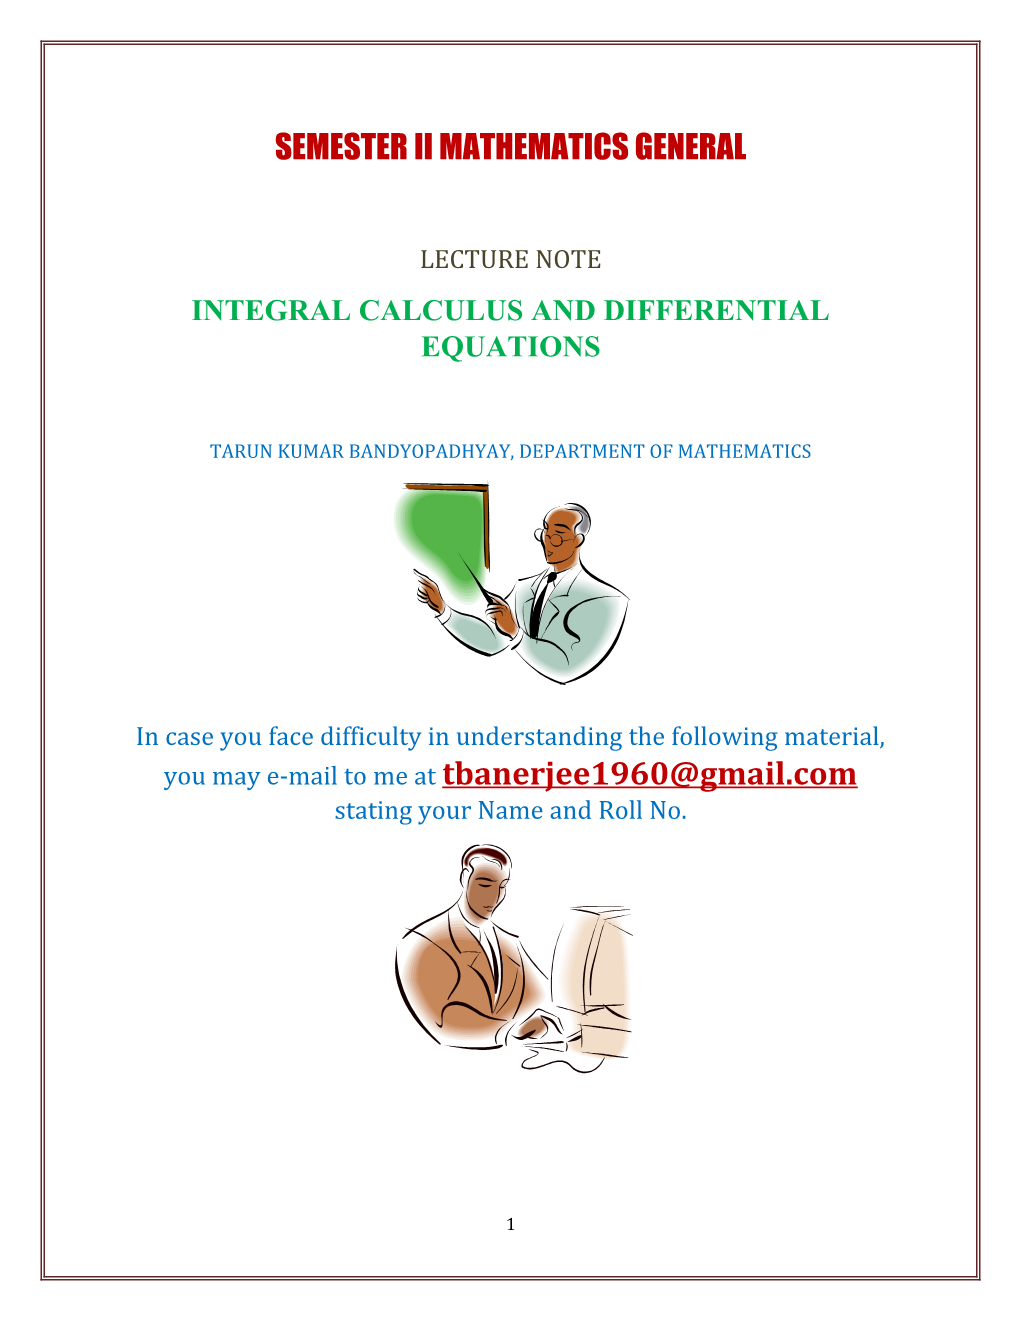 Integral Calculus and Differential Equations